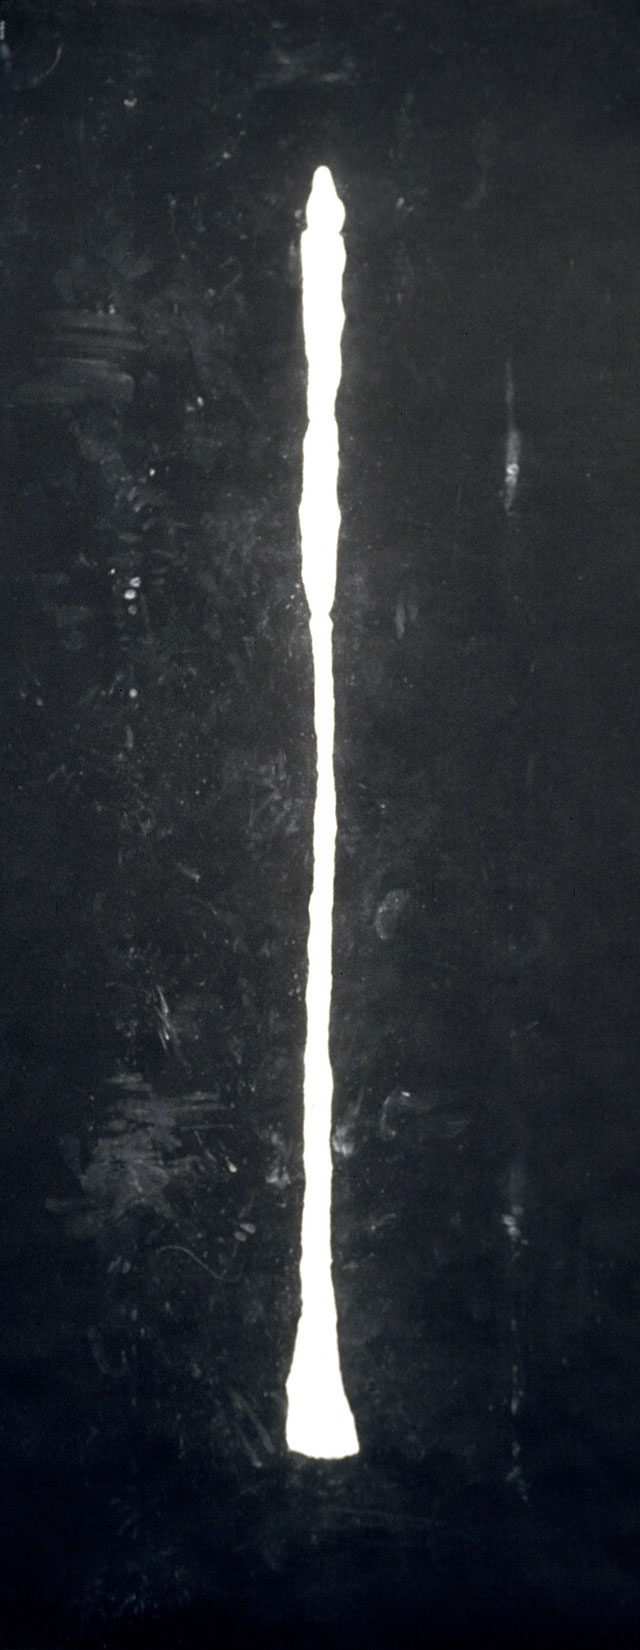 Robert Moskowitz. Giacometti Piece (For Bob Holman), 1984. Pastel on paper, 108 x 41 5/8 in. Museum Purchase, 1990. Courtesy Hirshhorn Museum and Sculpture Garden. Photograph: Lee Stalsworth.